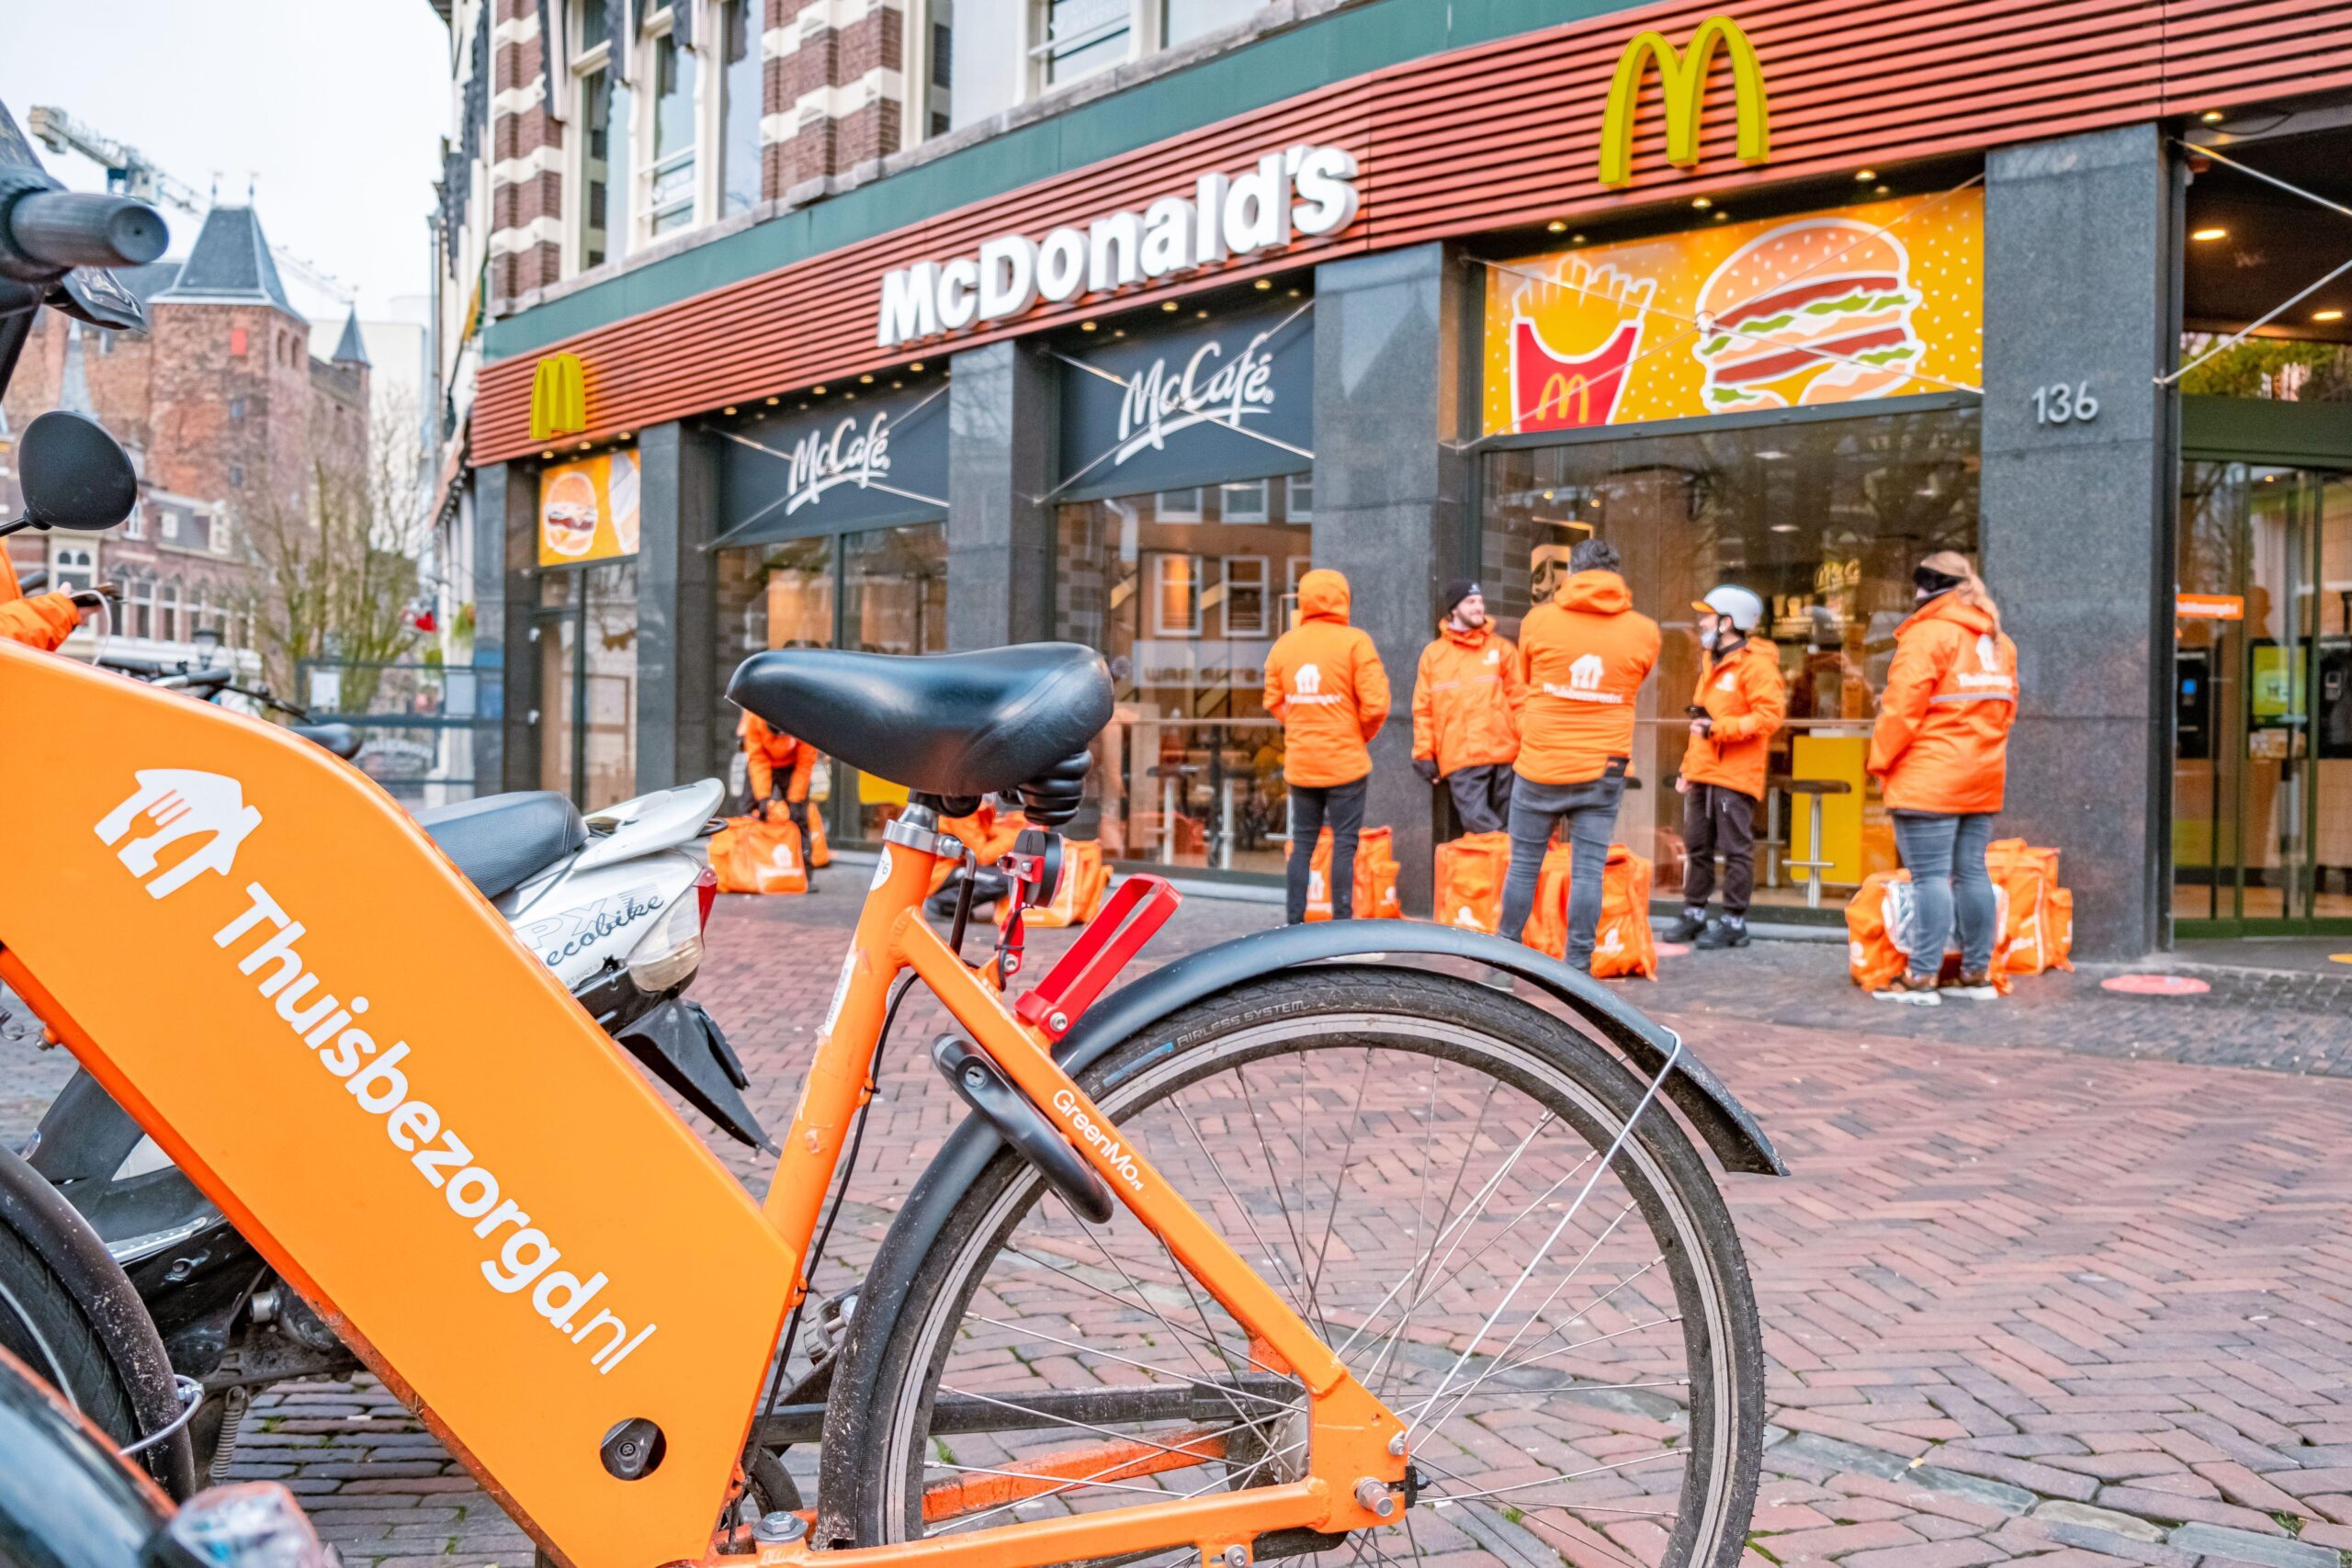 A pilot scheme at Amsterdam’s Schiphol Airport involved a partnership with an airline technology company, iFLEAT, and a local food delivery provider, Thuisbezorgd, part of Just Eat Takeaway airline food delivery